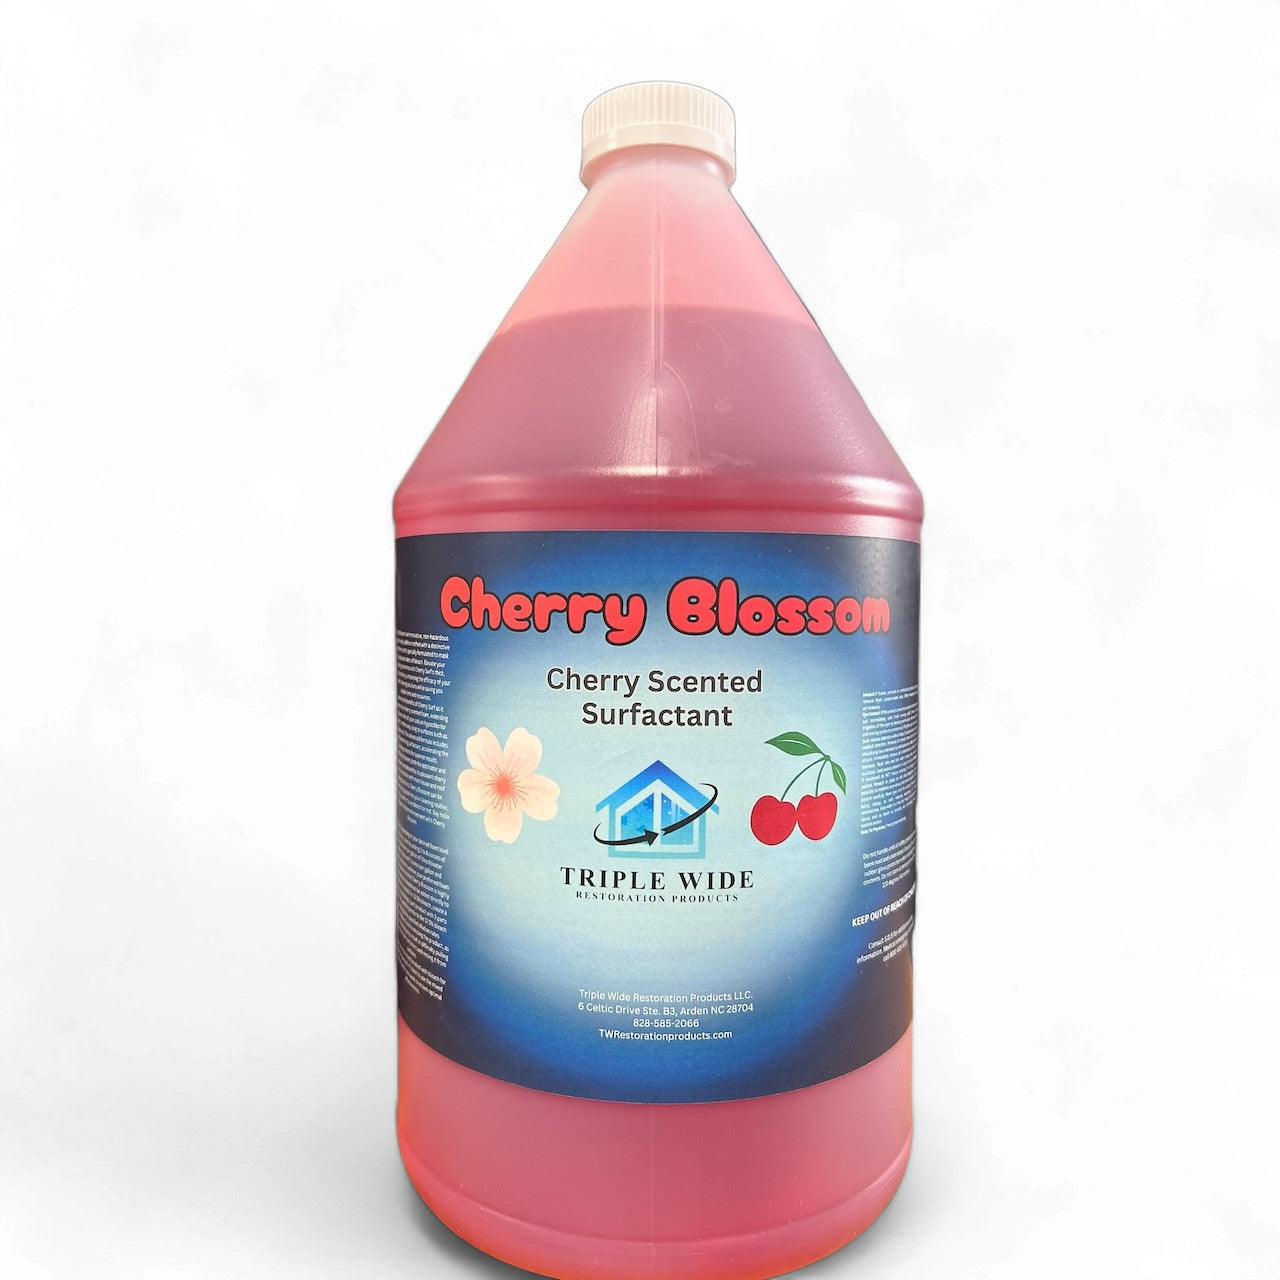 Cherry Blossom - Cherry Scented Soft Wash Surfactant